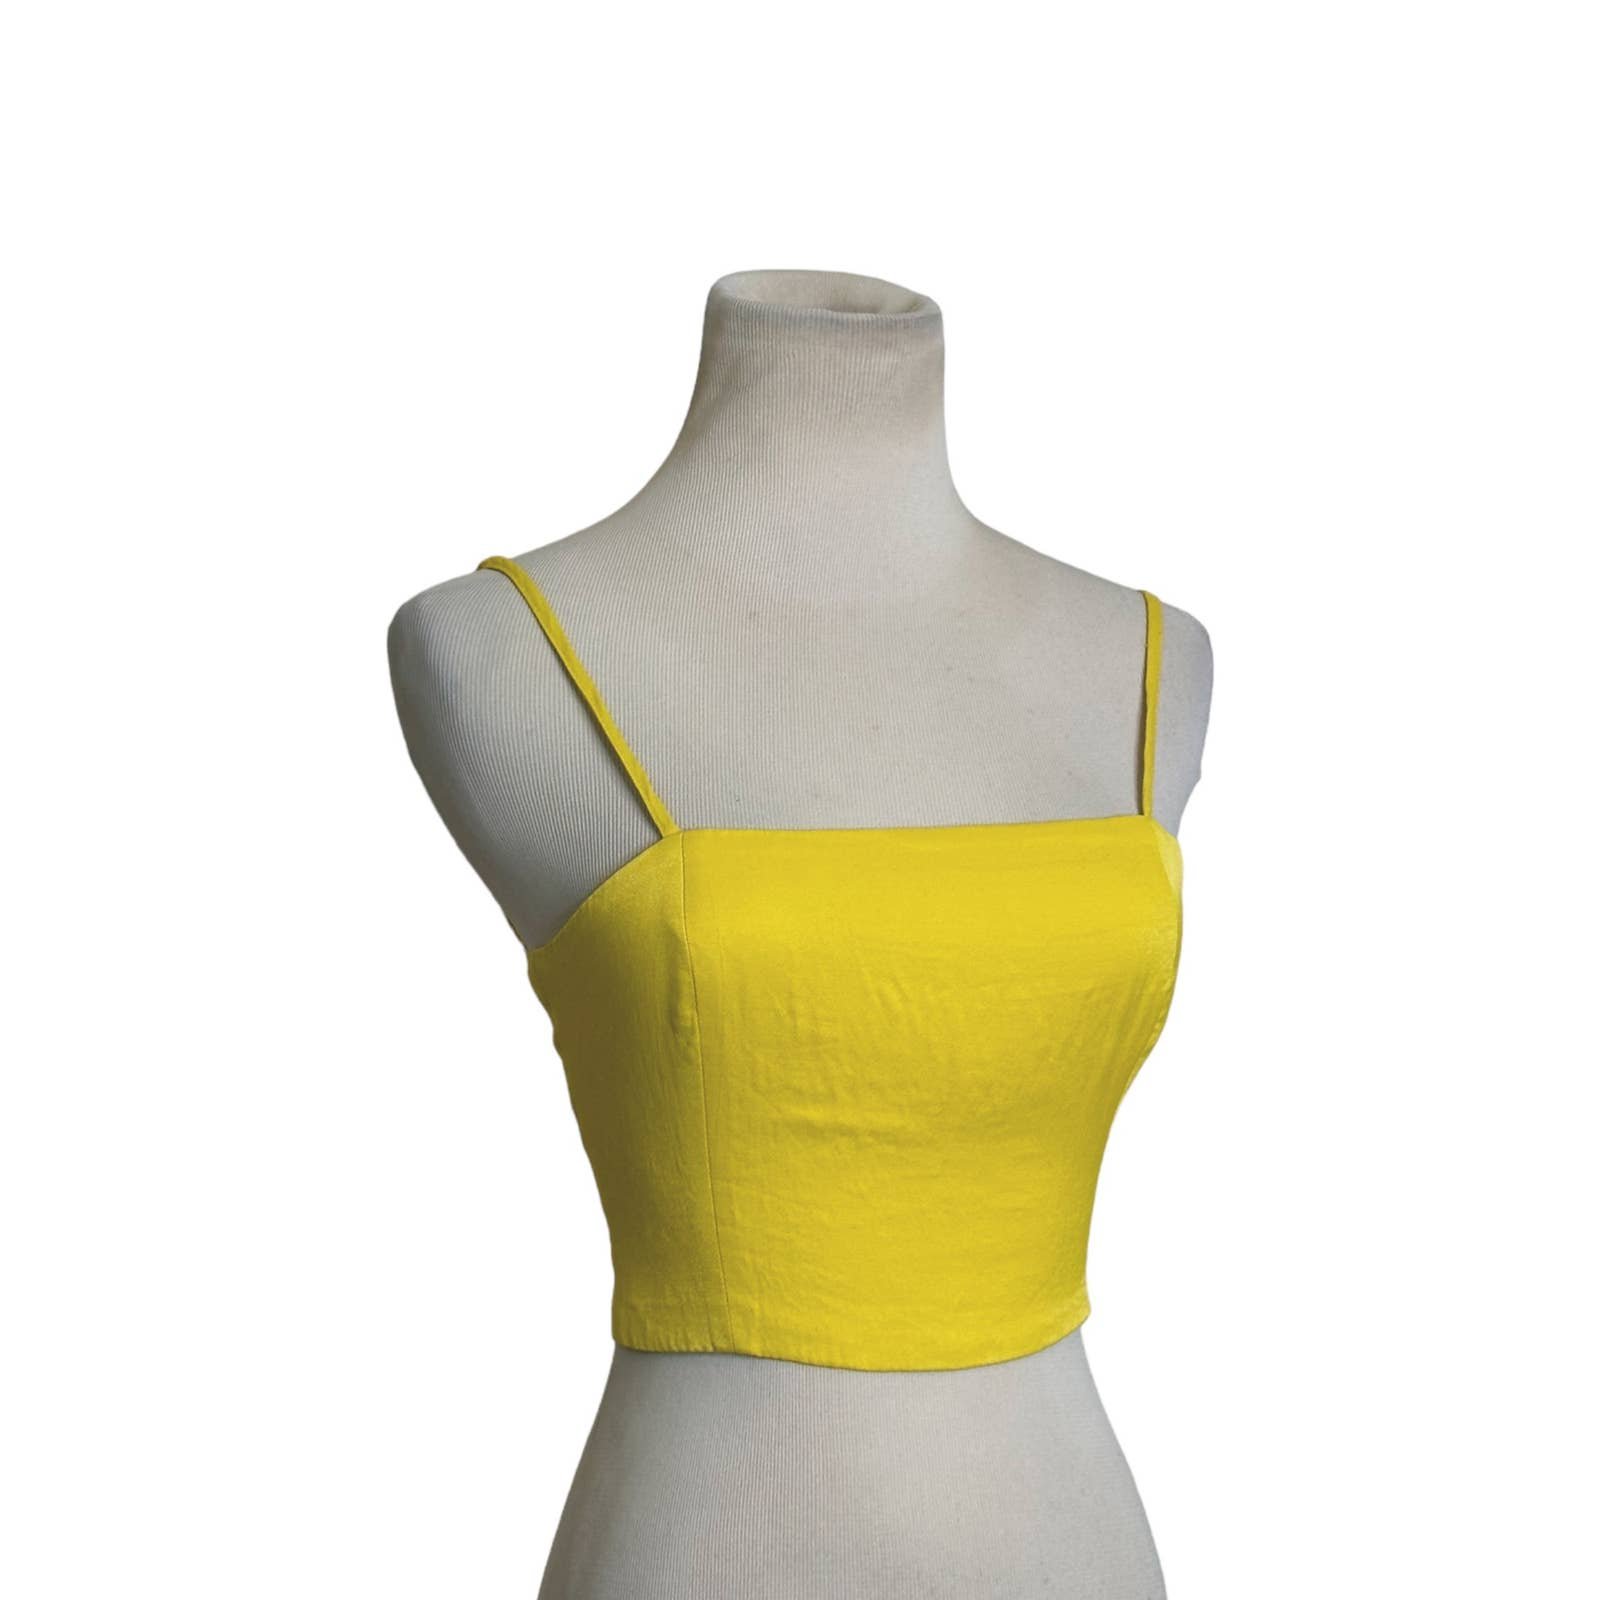 Classic Zara vibrant yellow crop top fitted sleeveless 